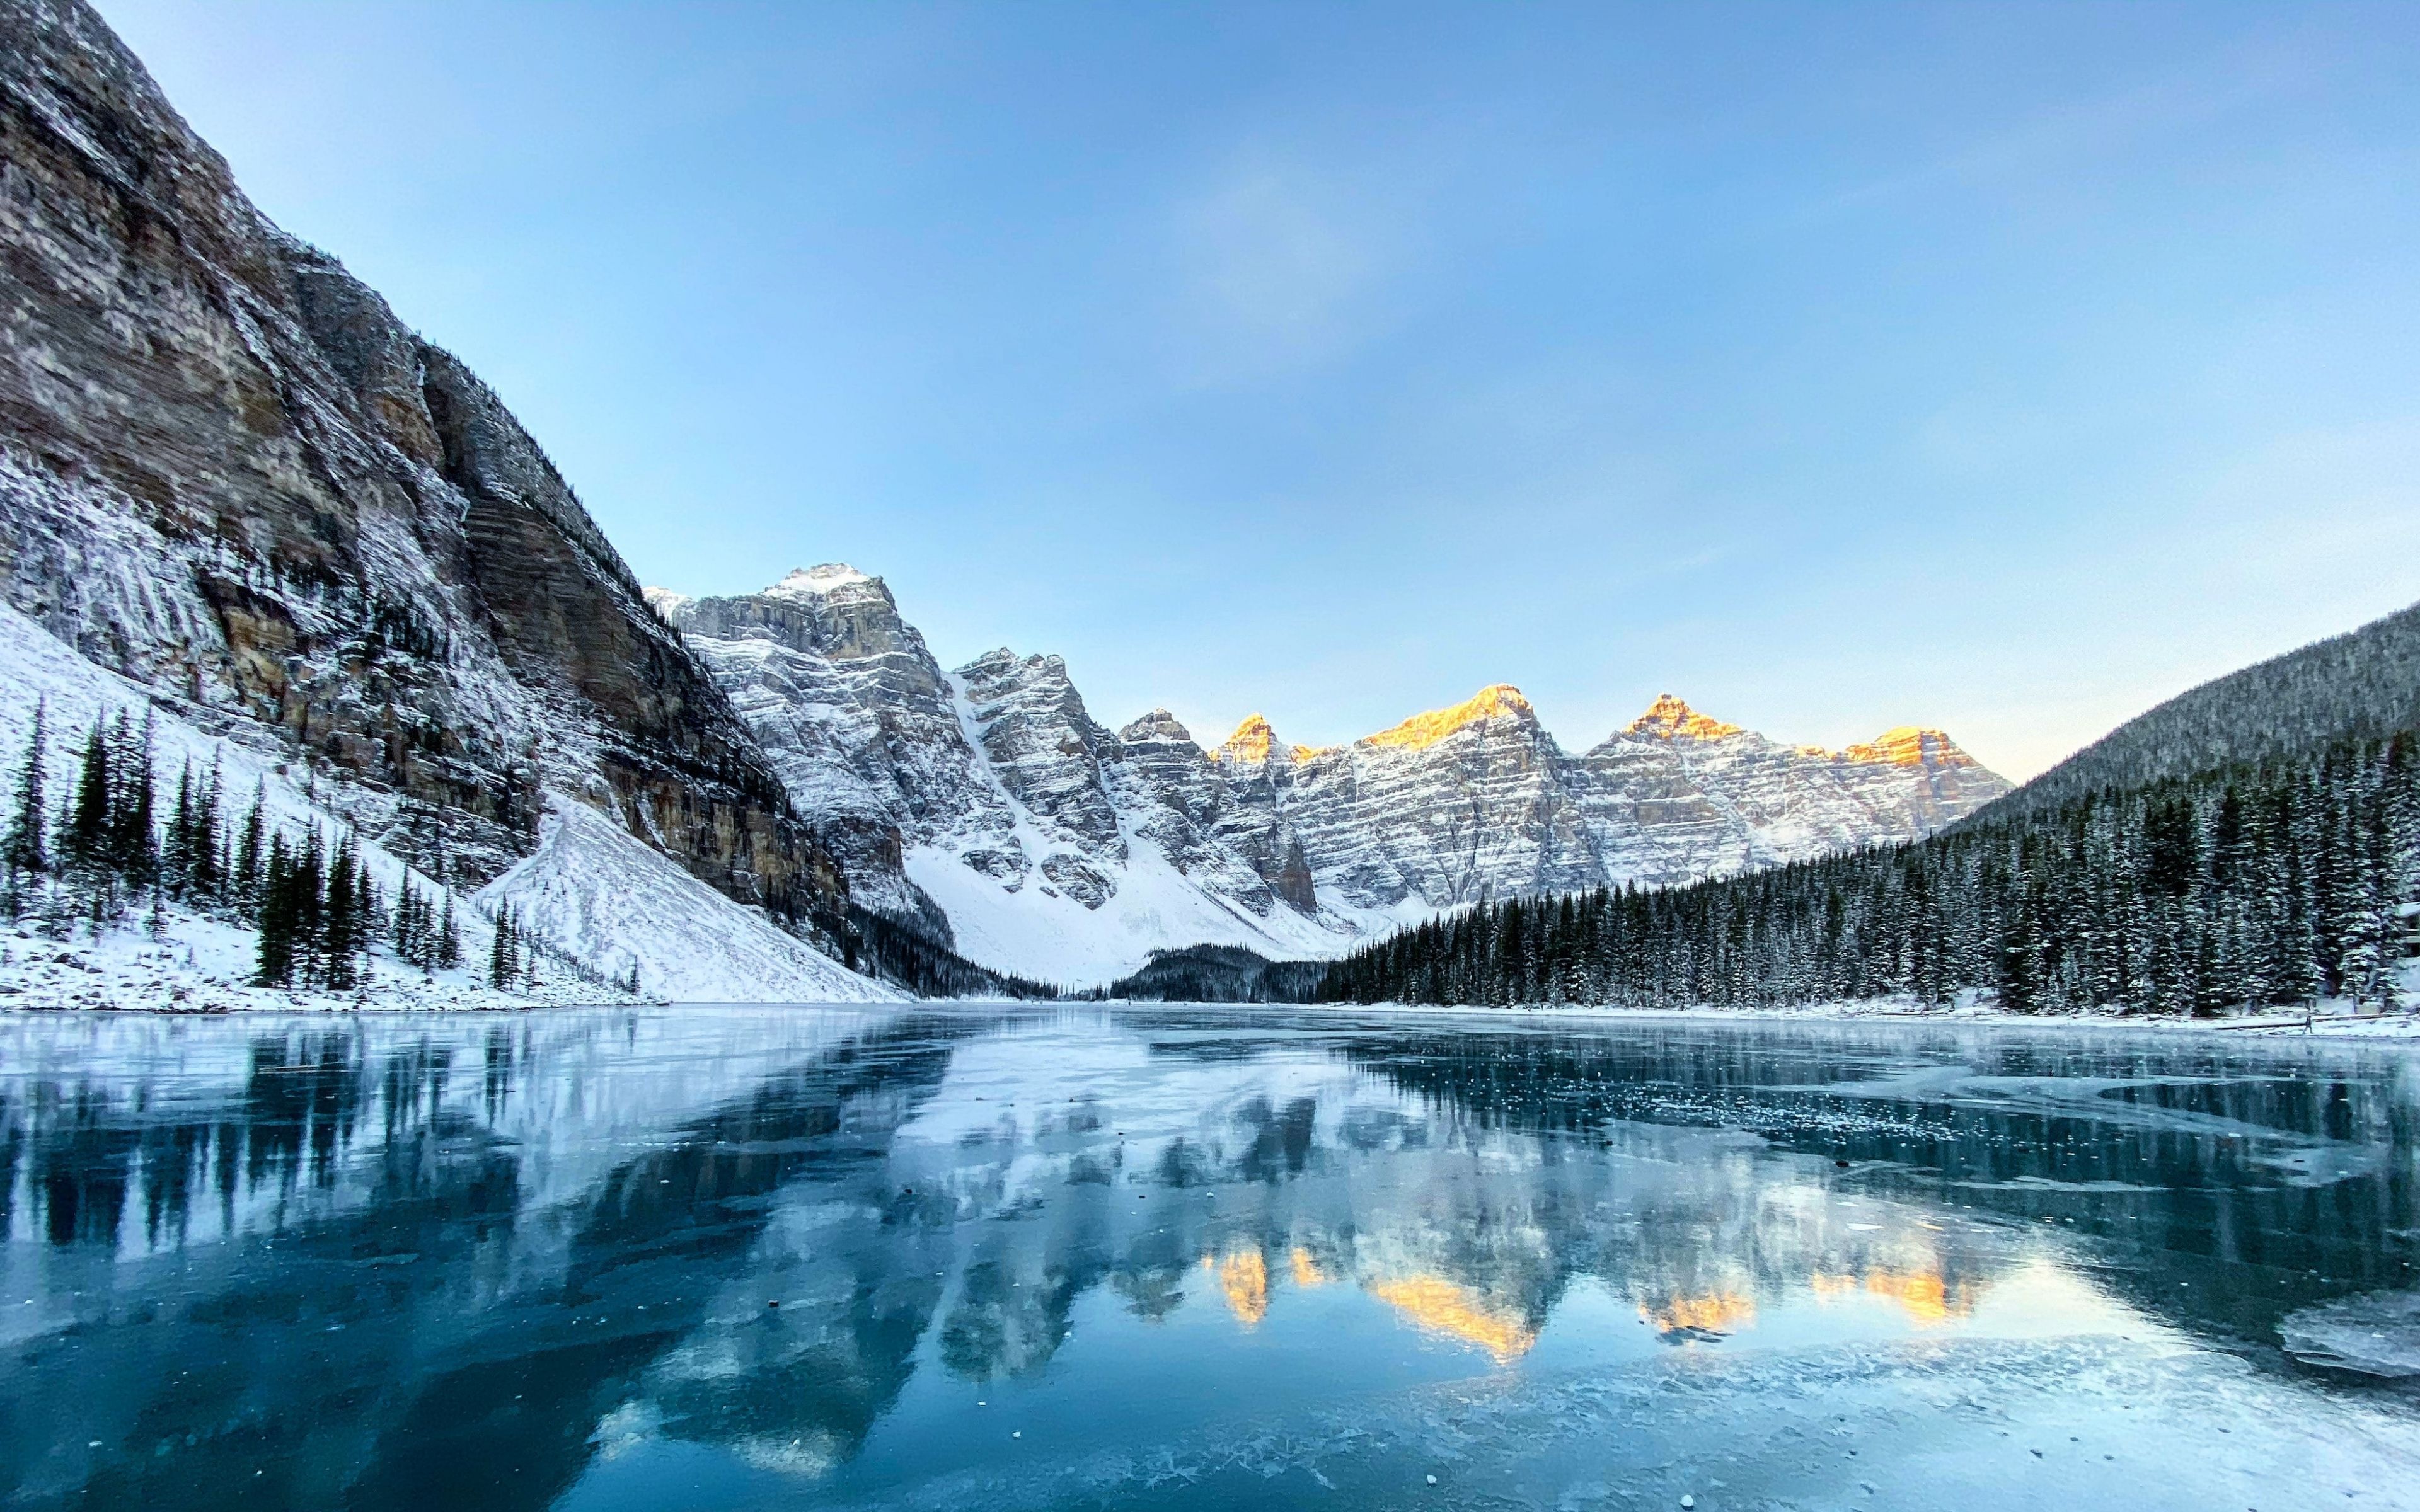 Download 3840x2400 wallpaper moraine lake, nature, reflections, forest, canada, 4k, ultra HD 16: widescreen, 3840x2400 HD image, background, 23791